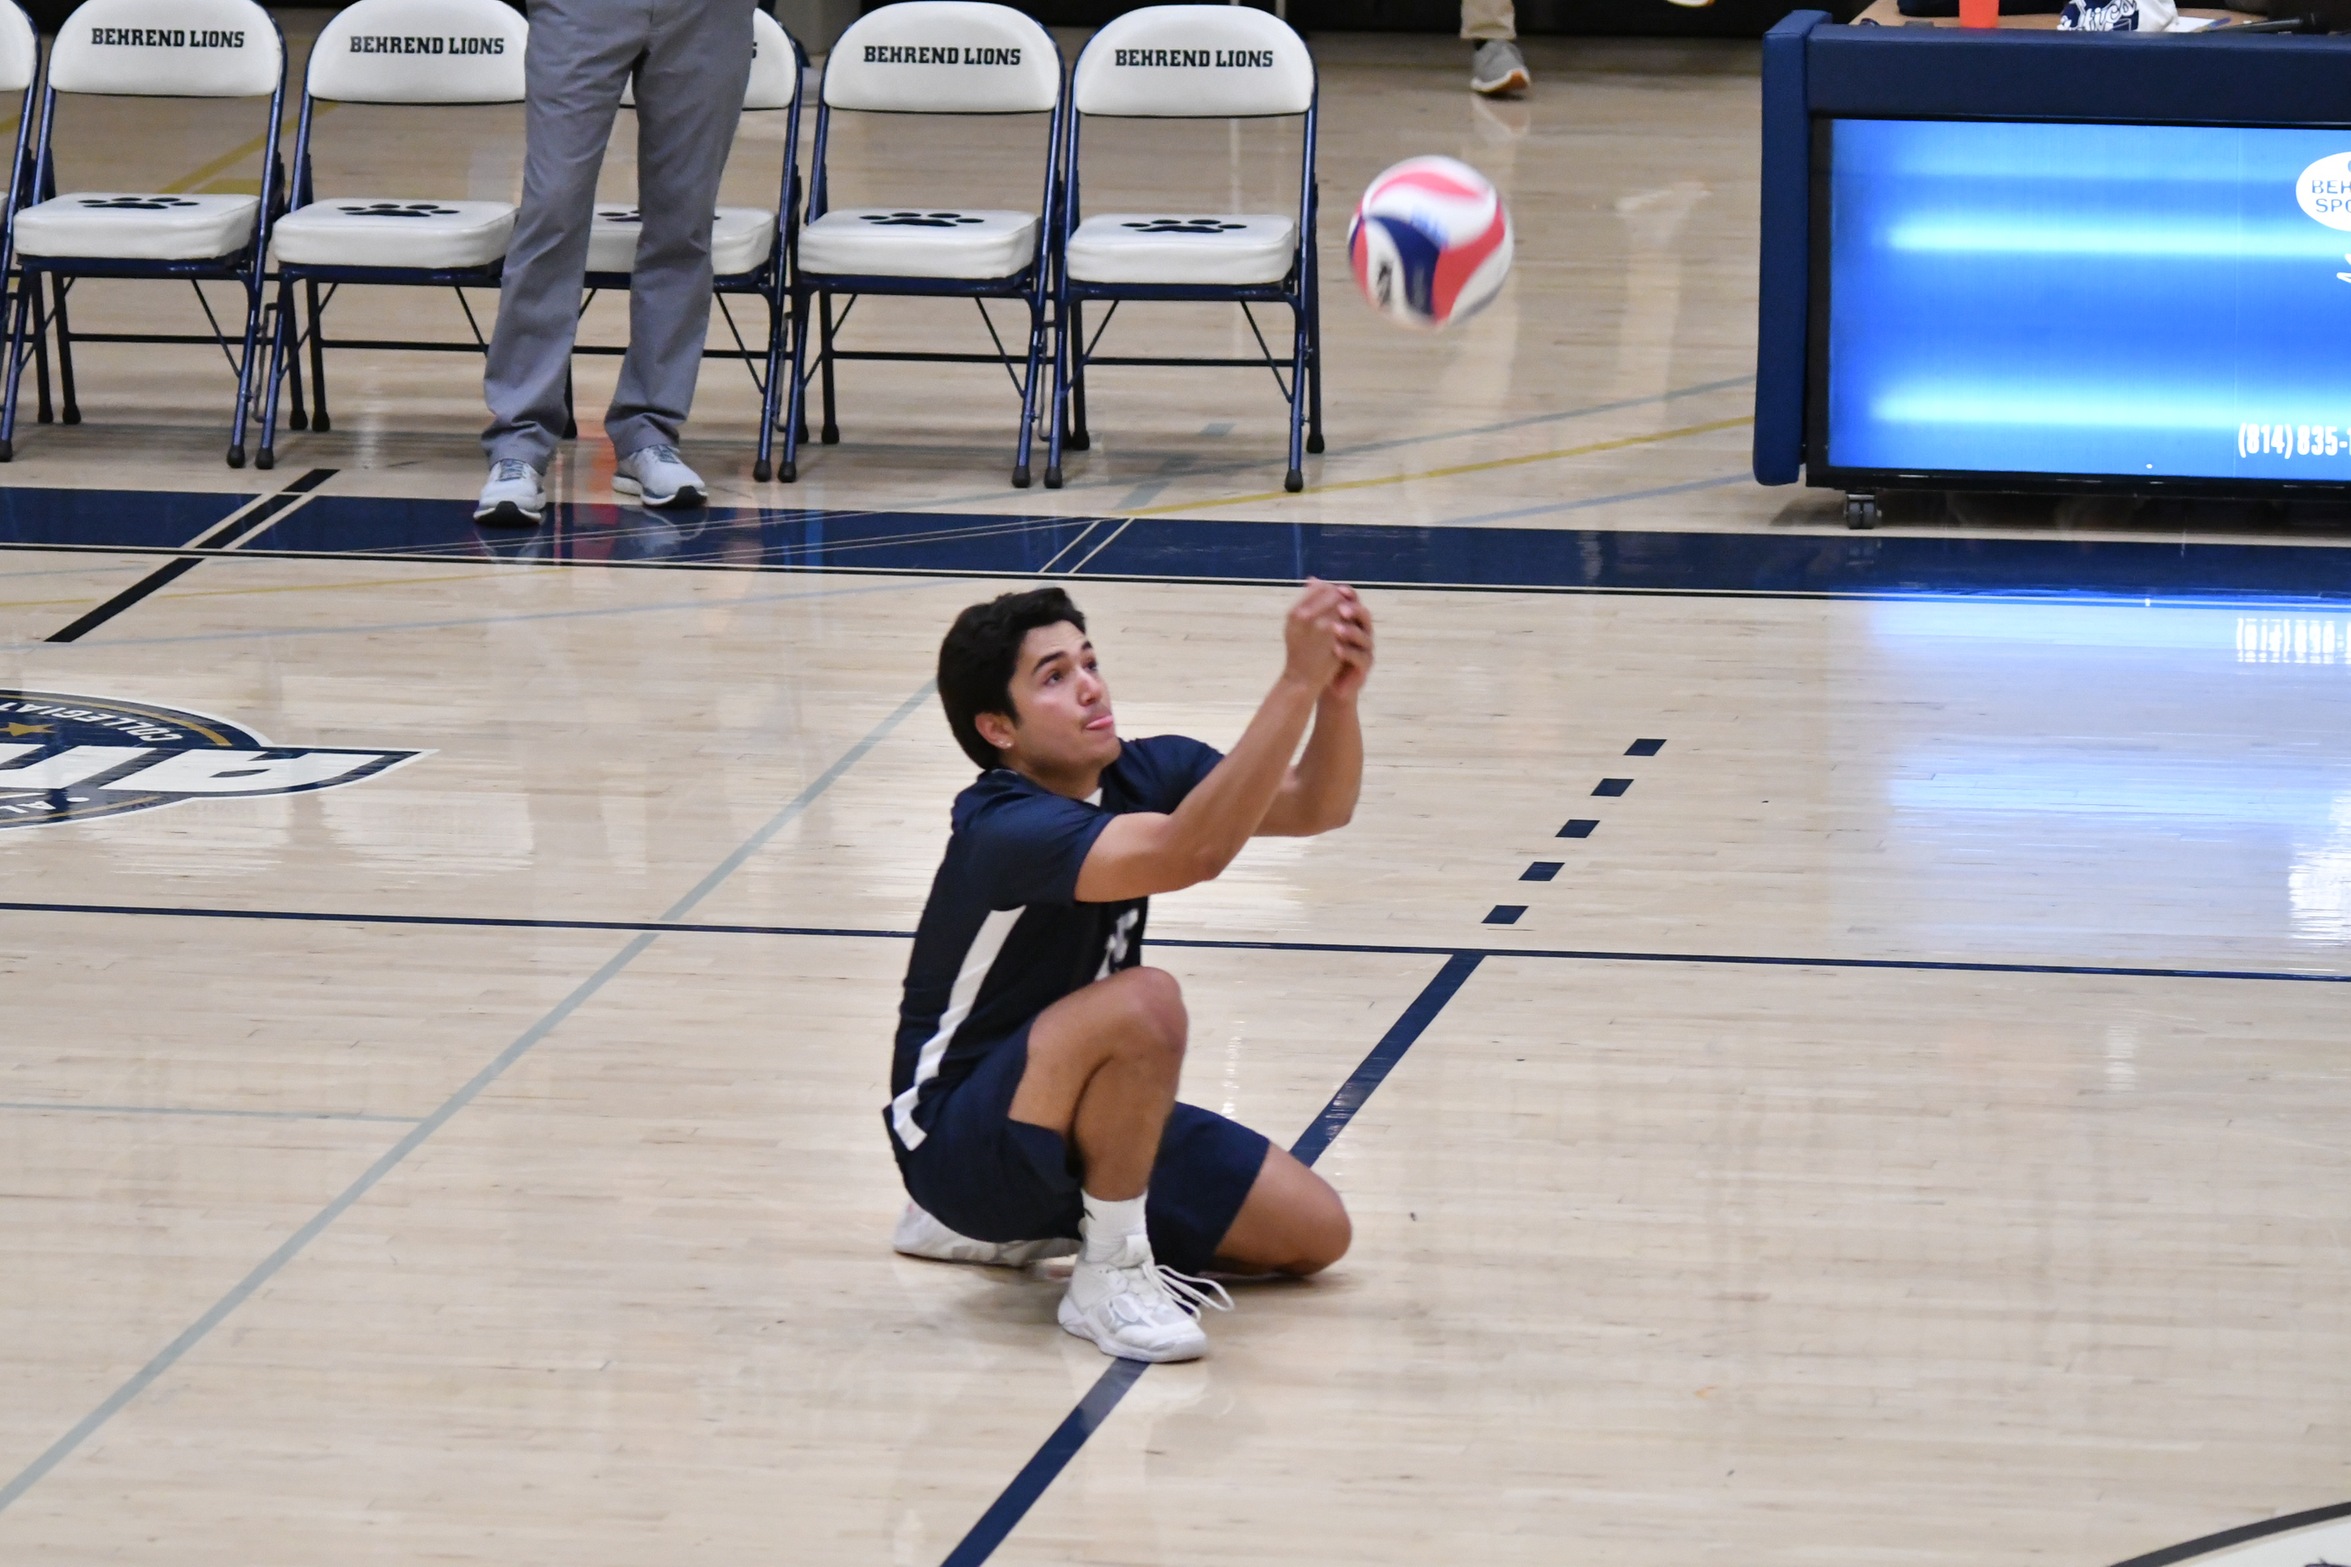 Behrend Men's Volleyball Takes Down Drew and Hunter